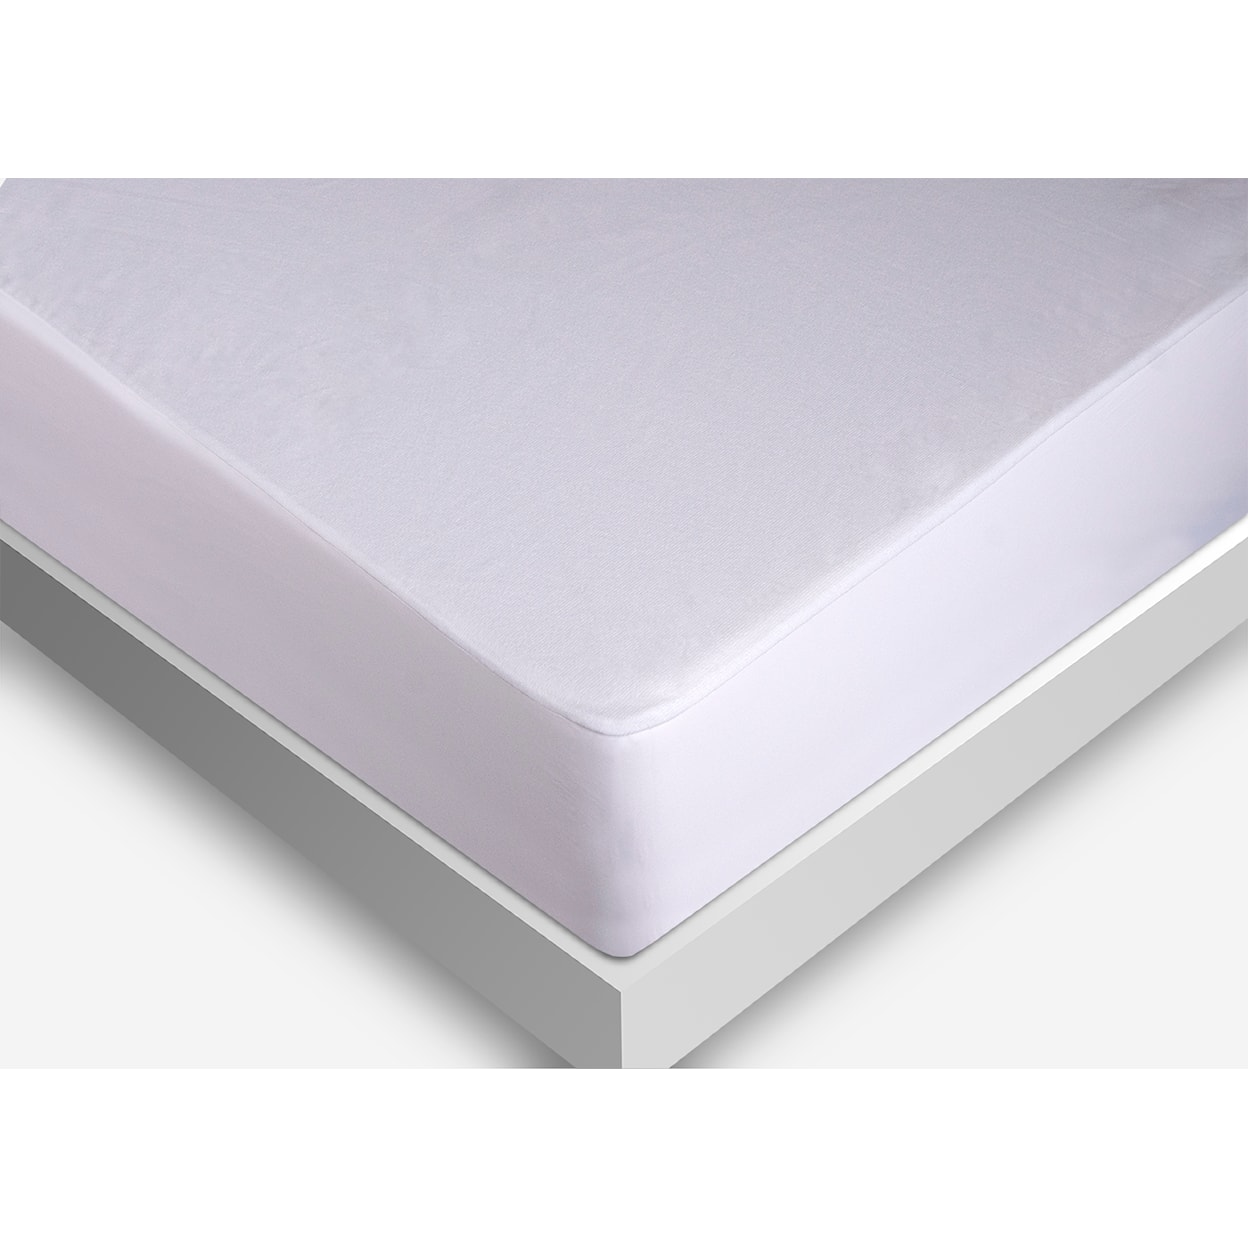 iProtect Mattress Protector, Waterproof Covers